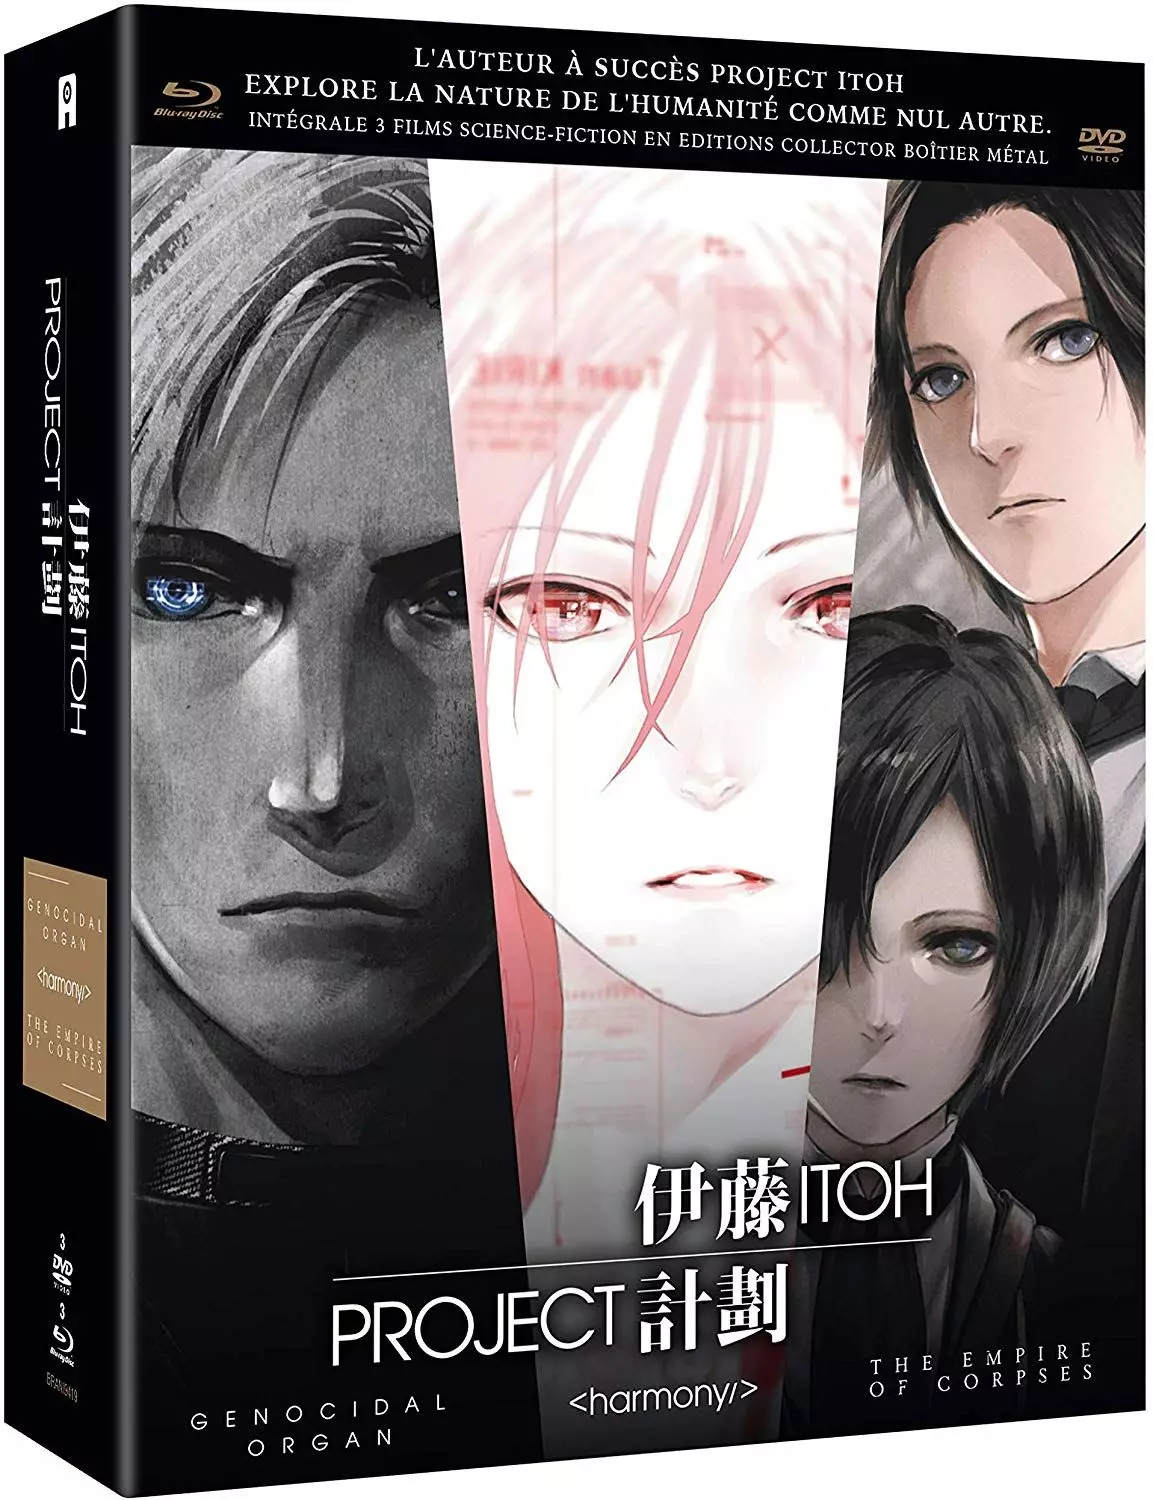 Project Itoh - Intégrale Trilogie Films (Genocidal Organ, , The Empire of Corpses) - Steelbook Collector